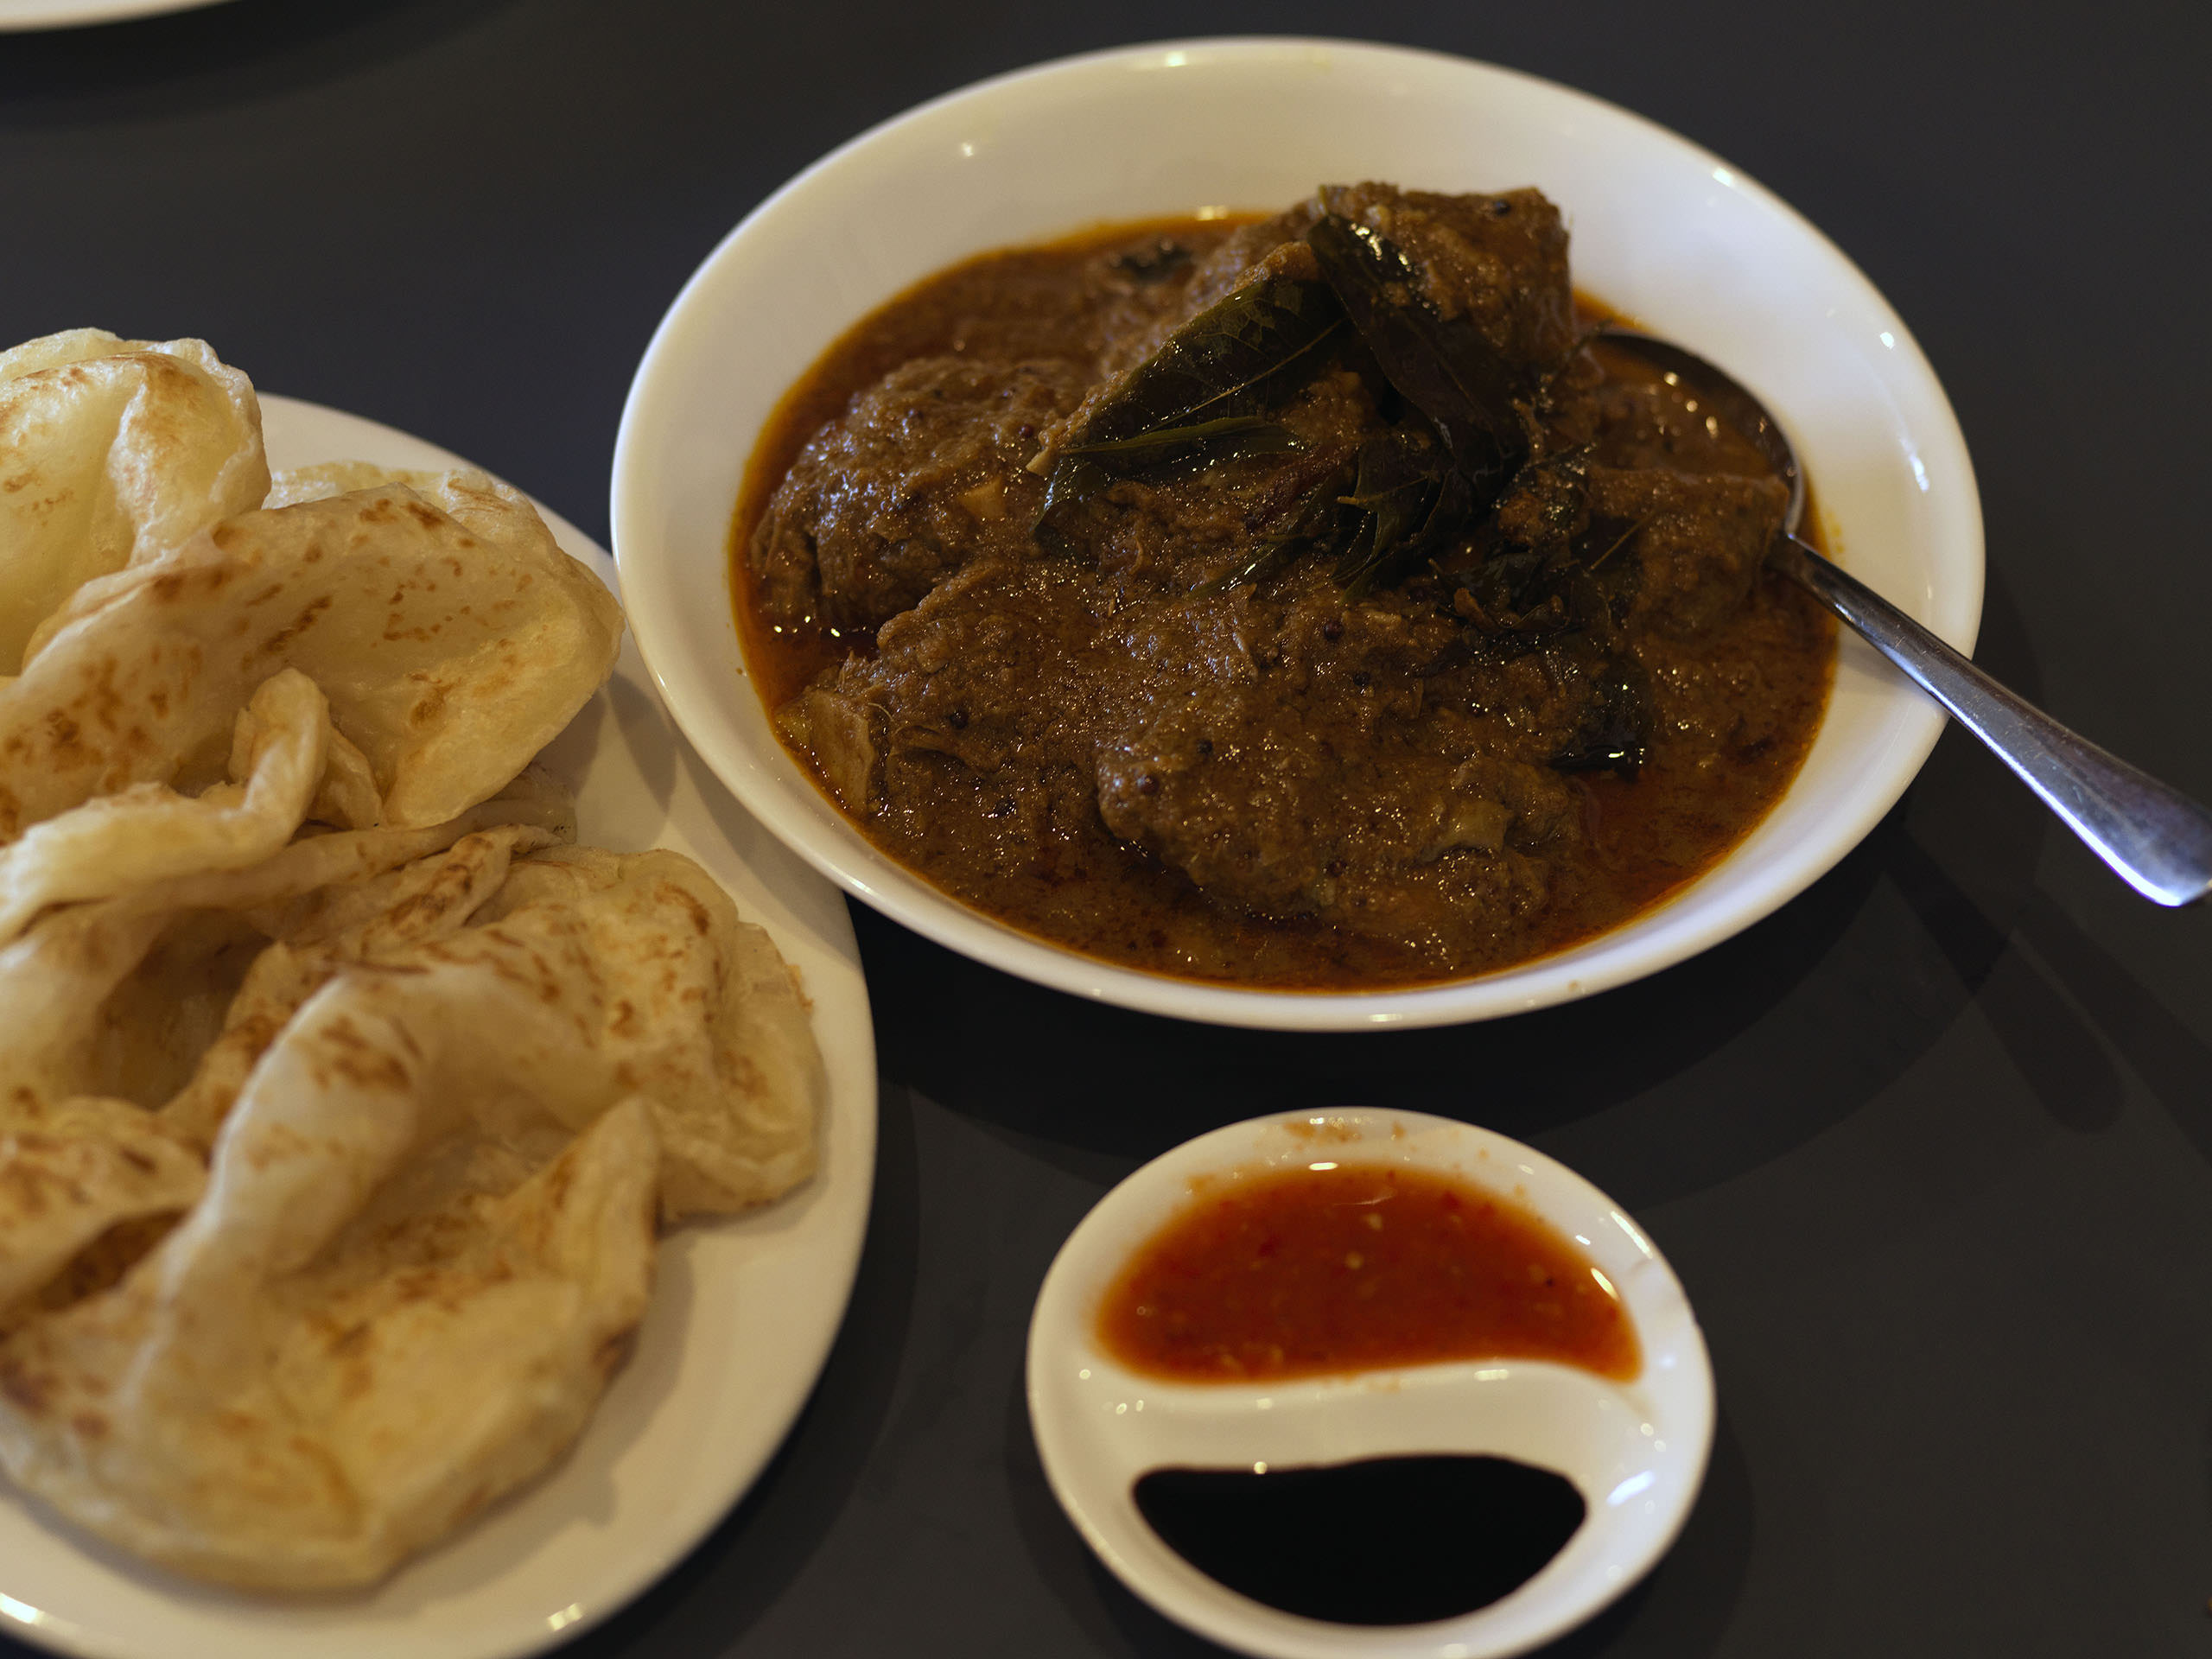 Beef Rendang - made for scooping with roti